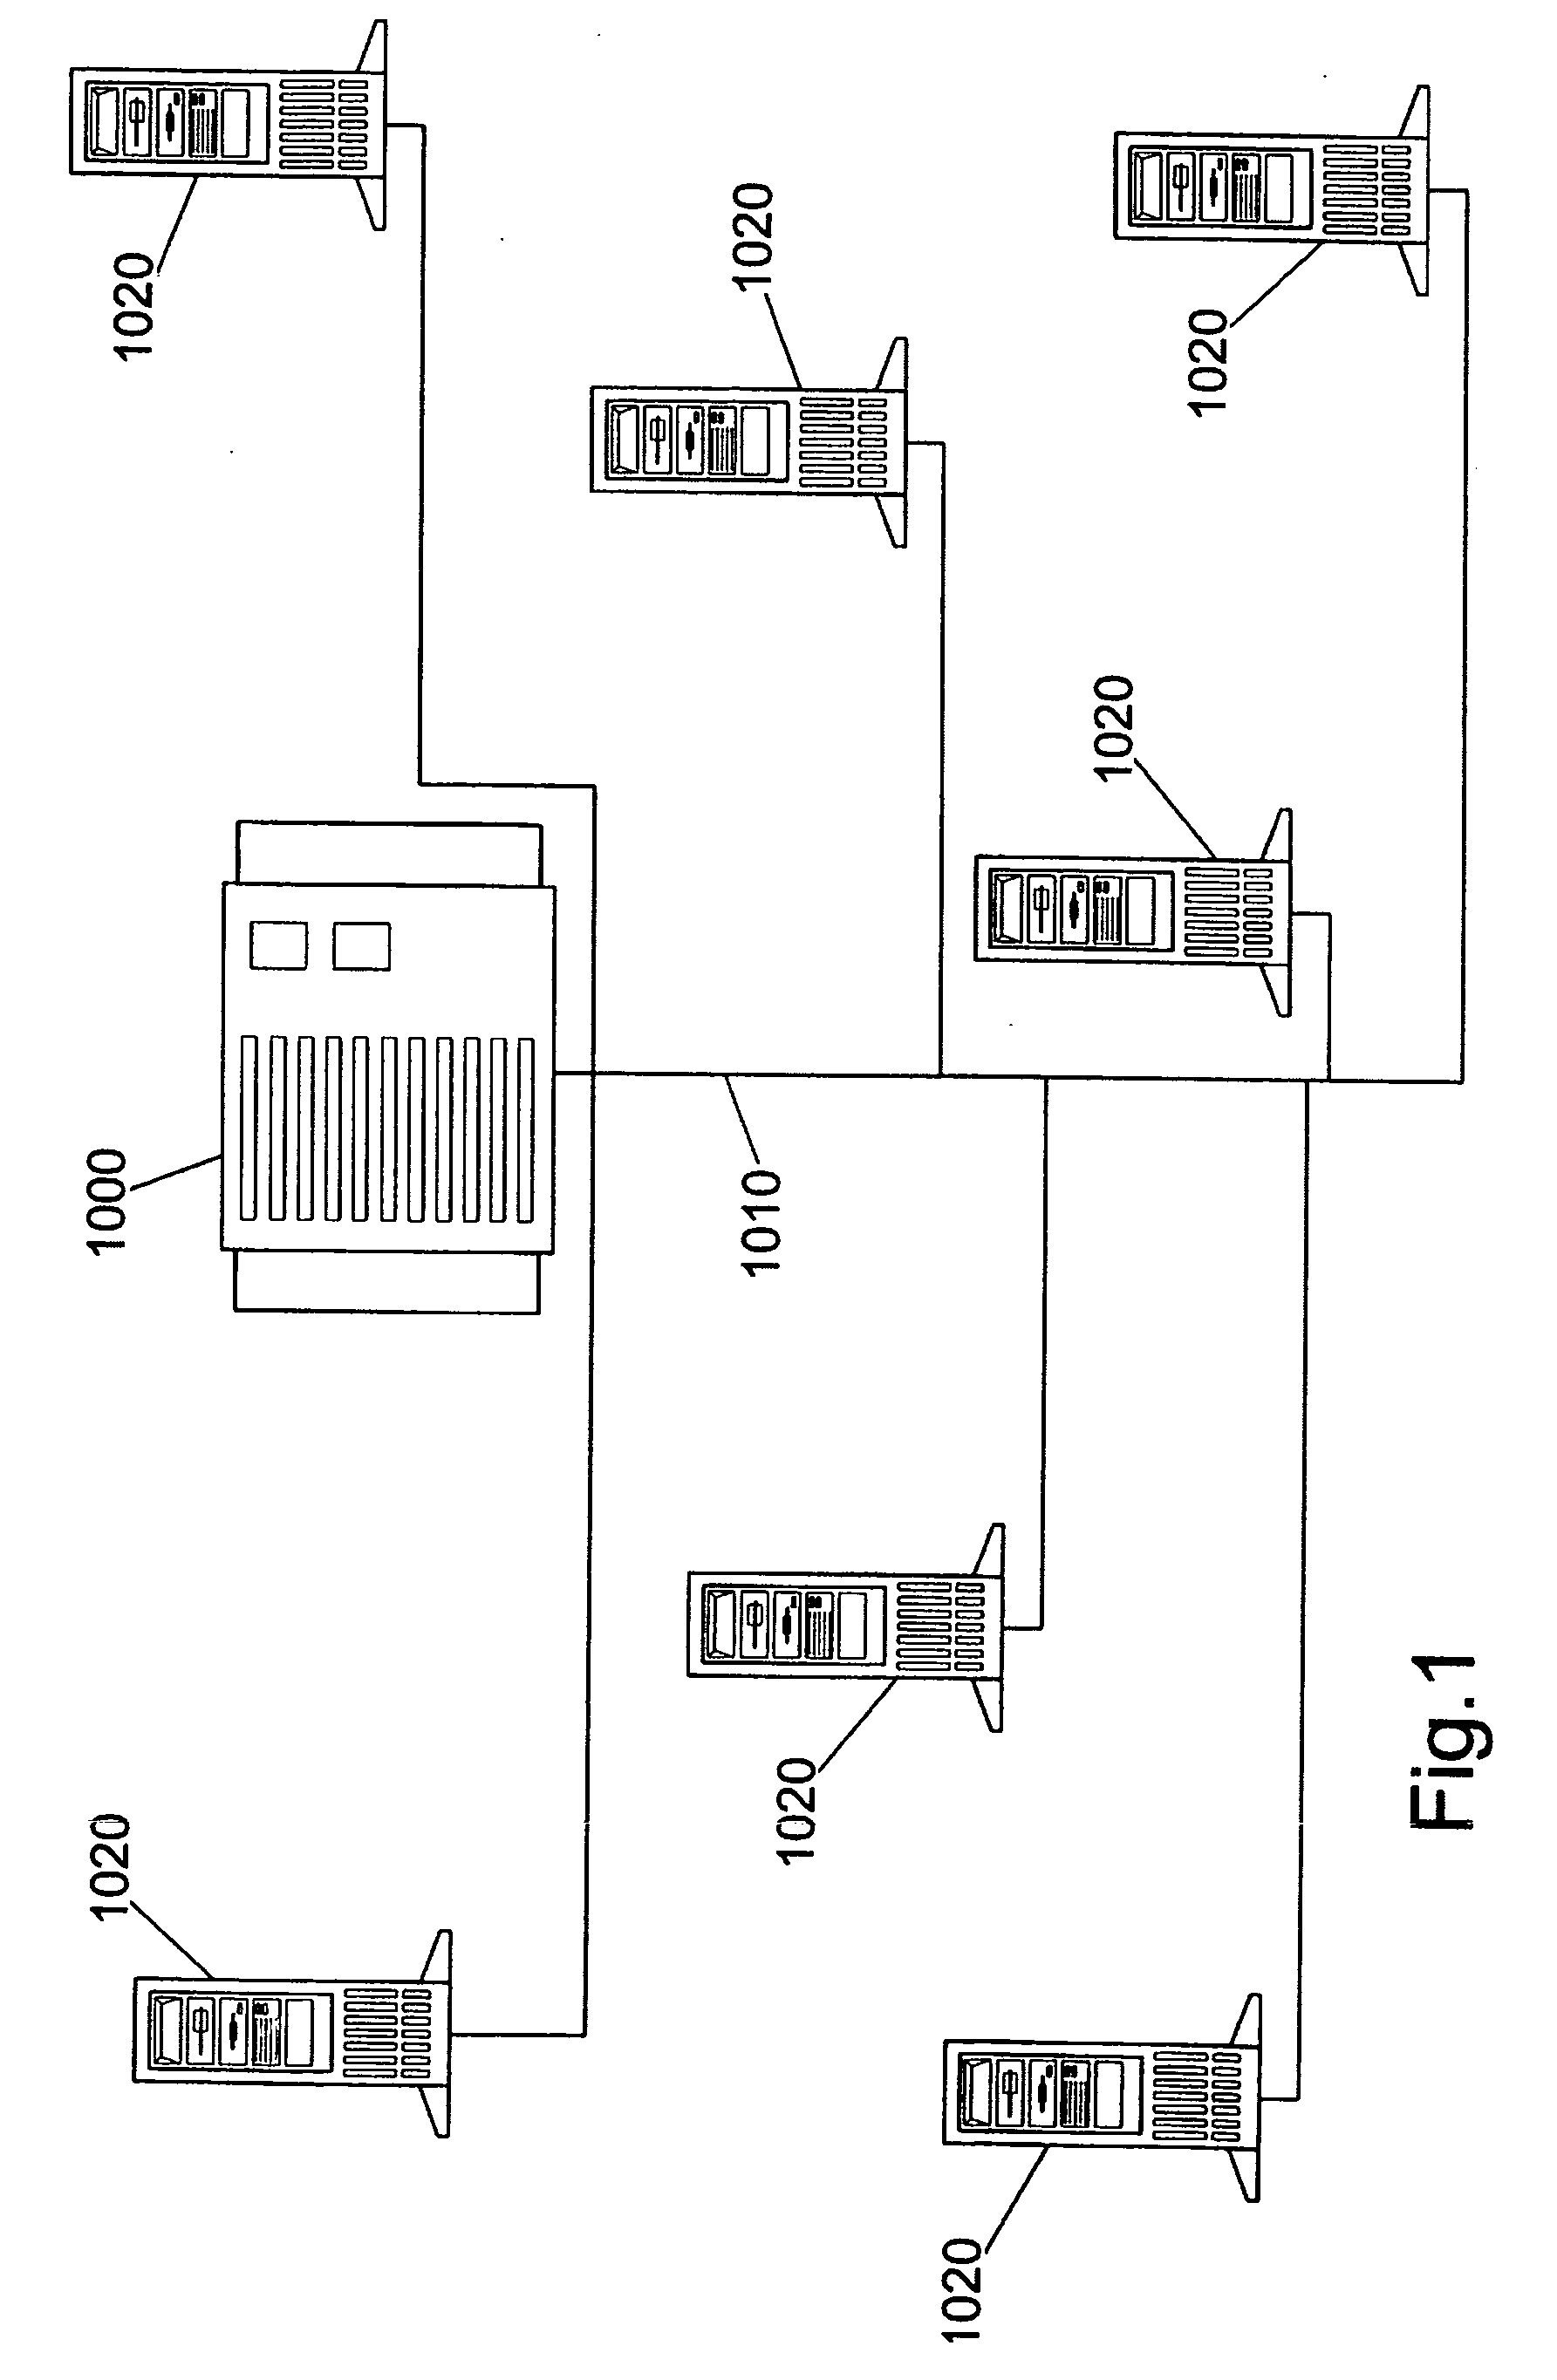 Method and apparatus for managing printing devices